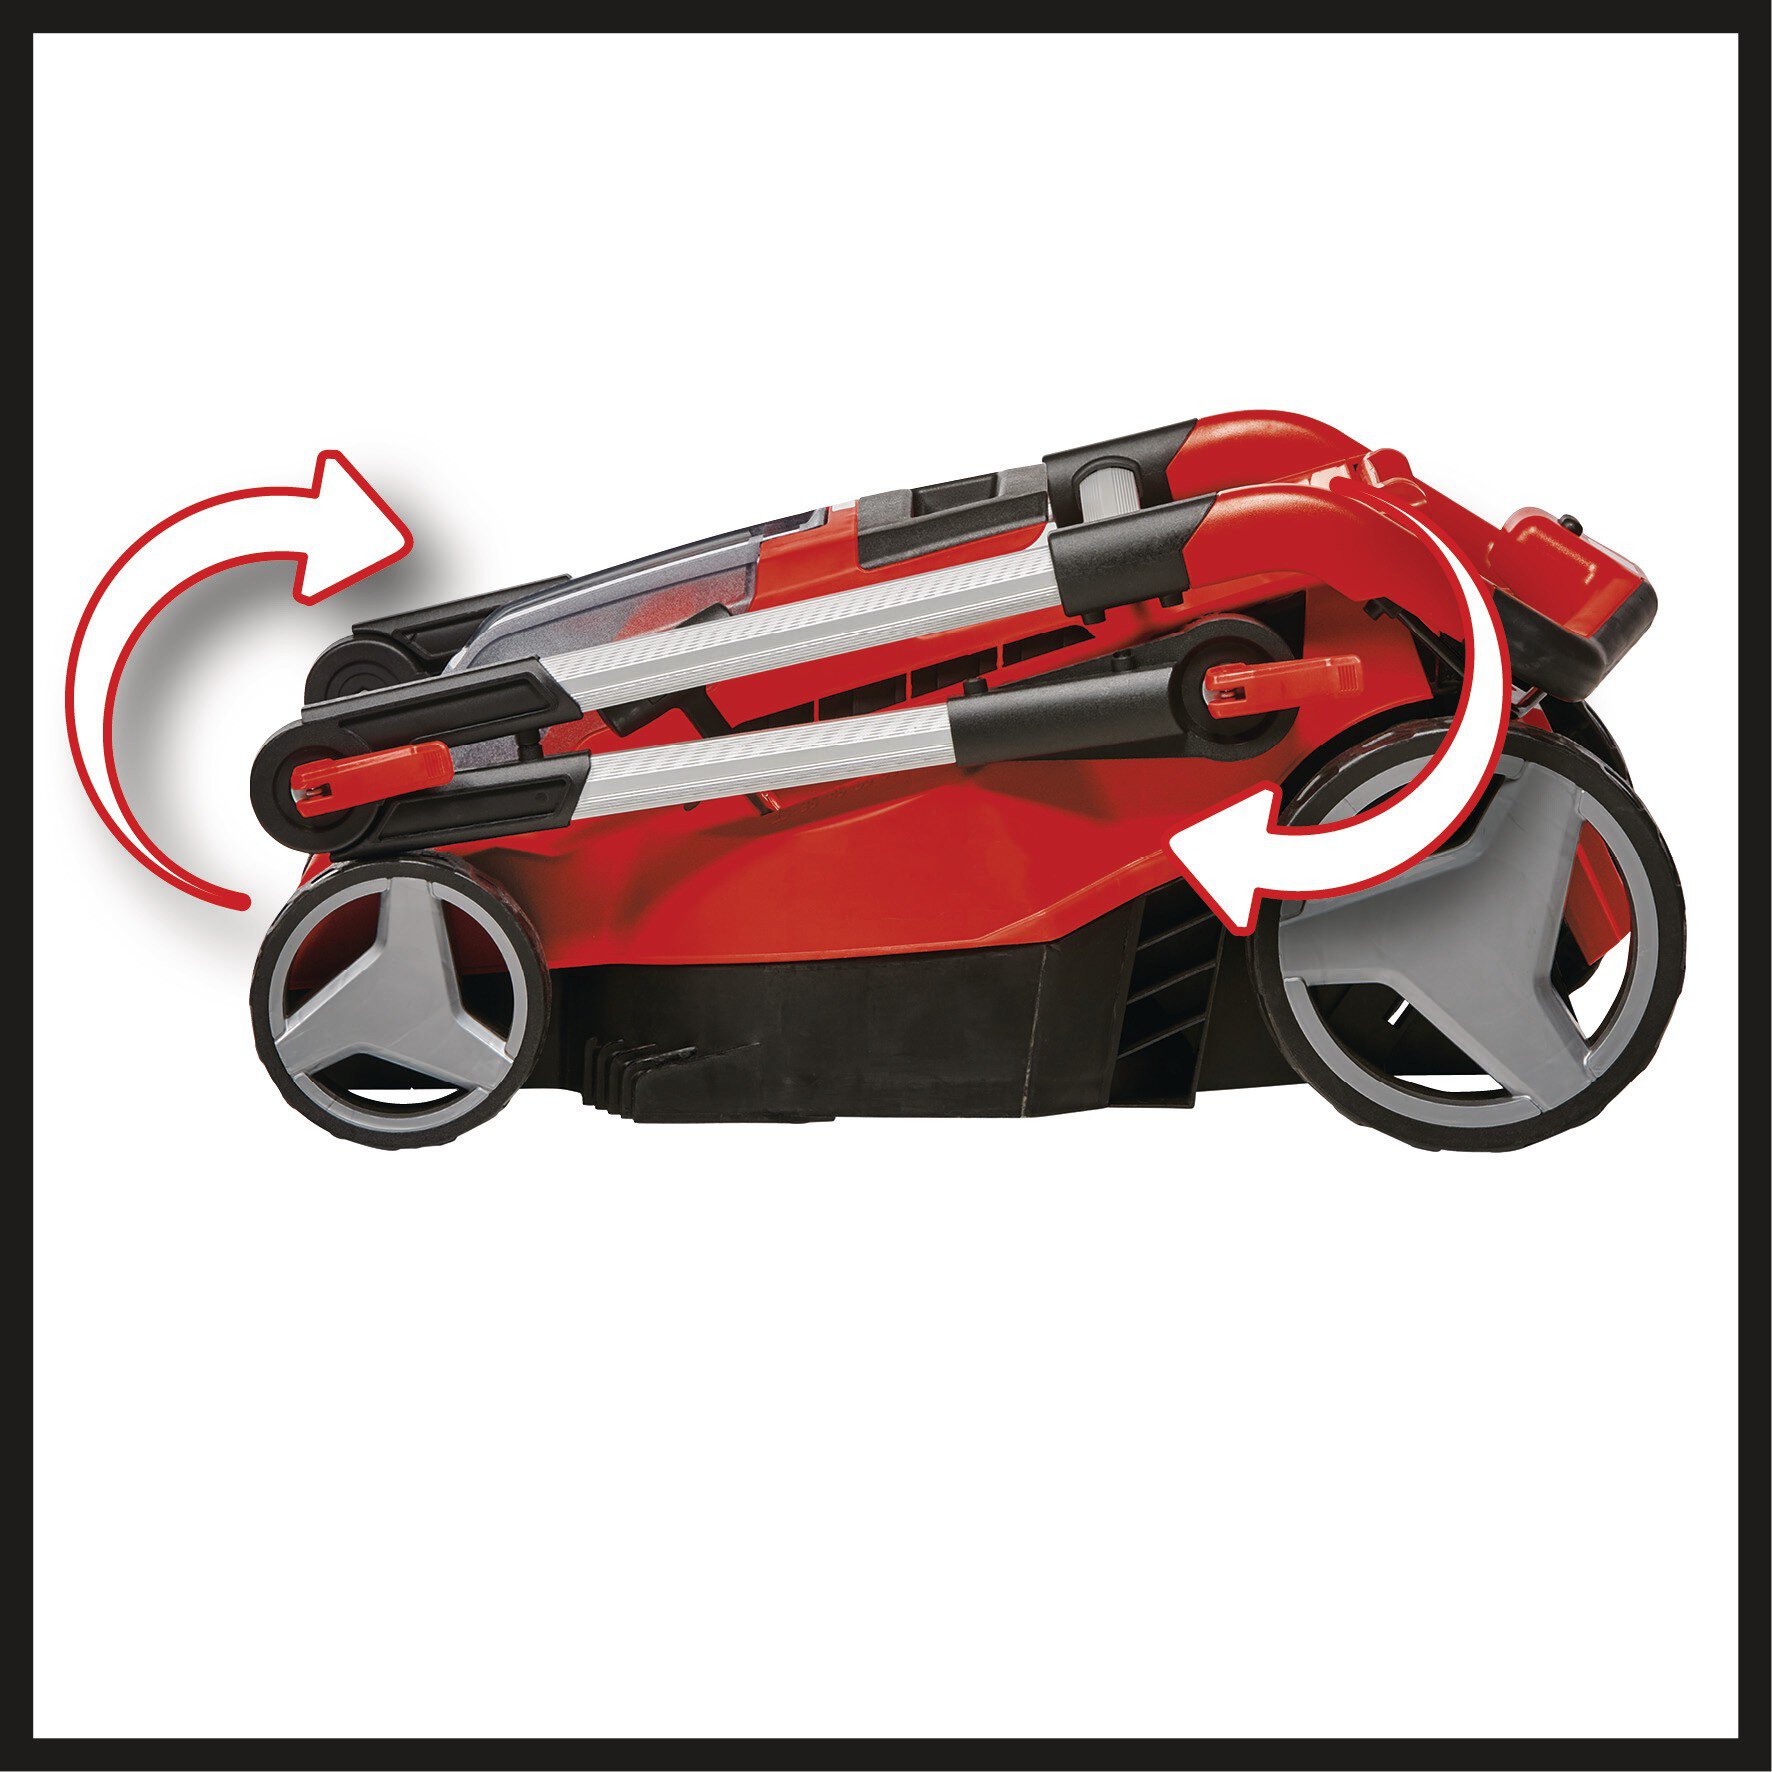 einhell-professional-cordless-lawn-mower-3413278-detail_image-003